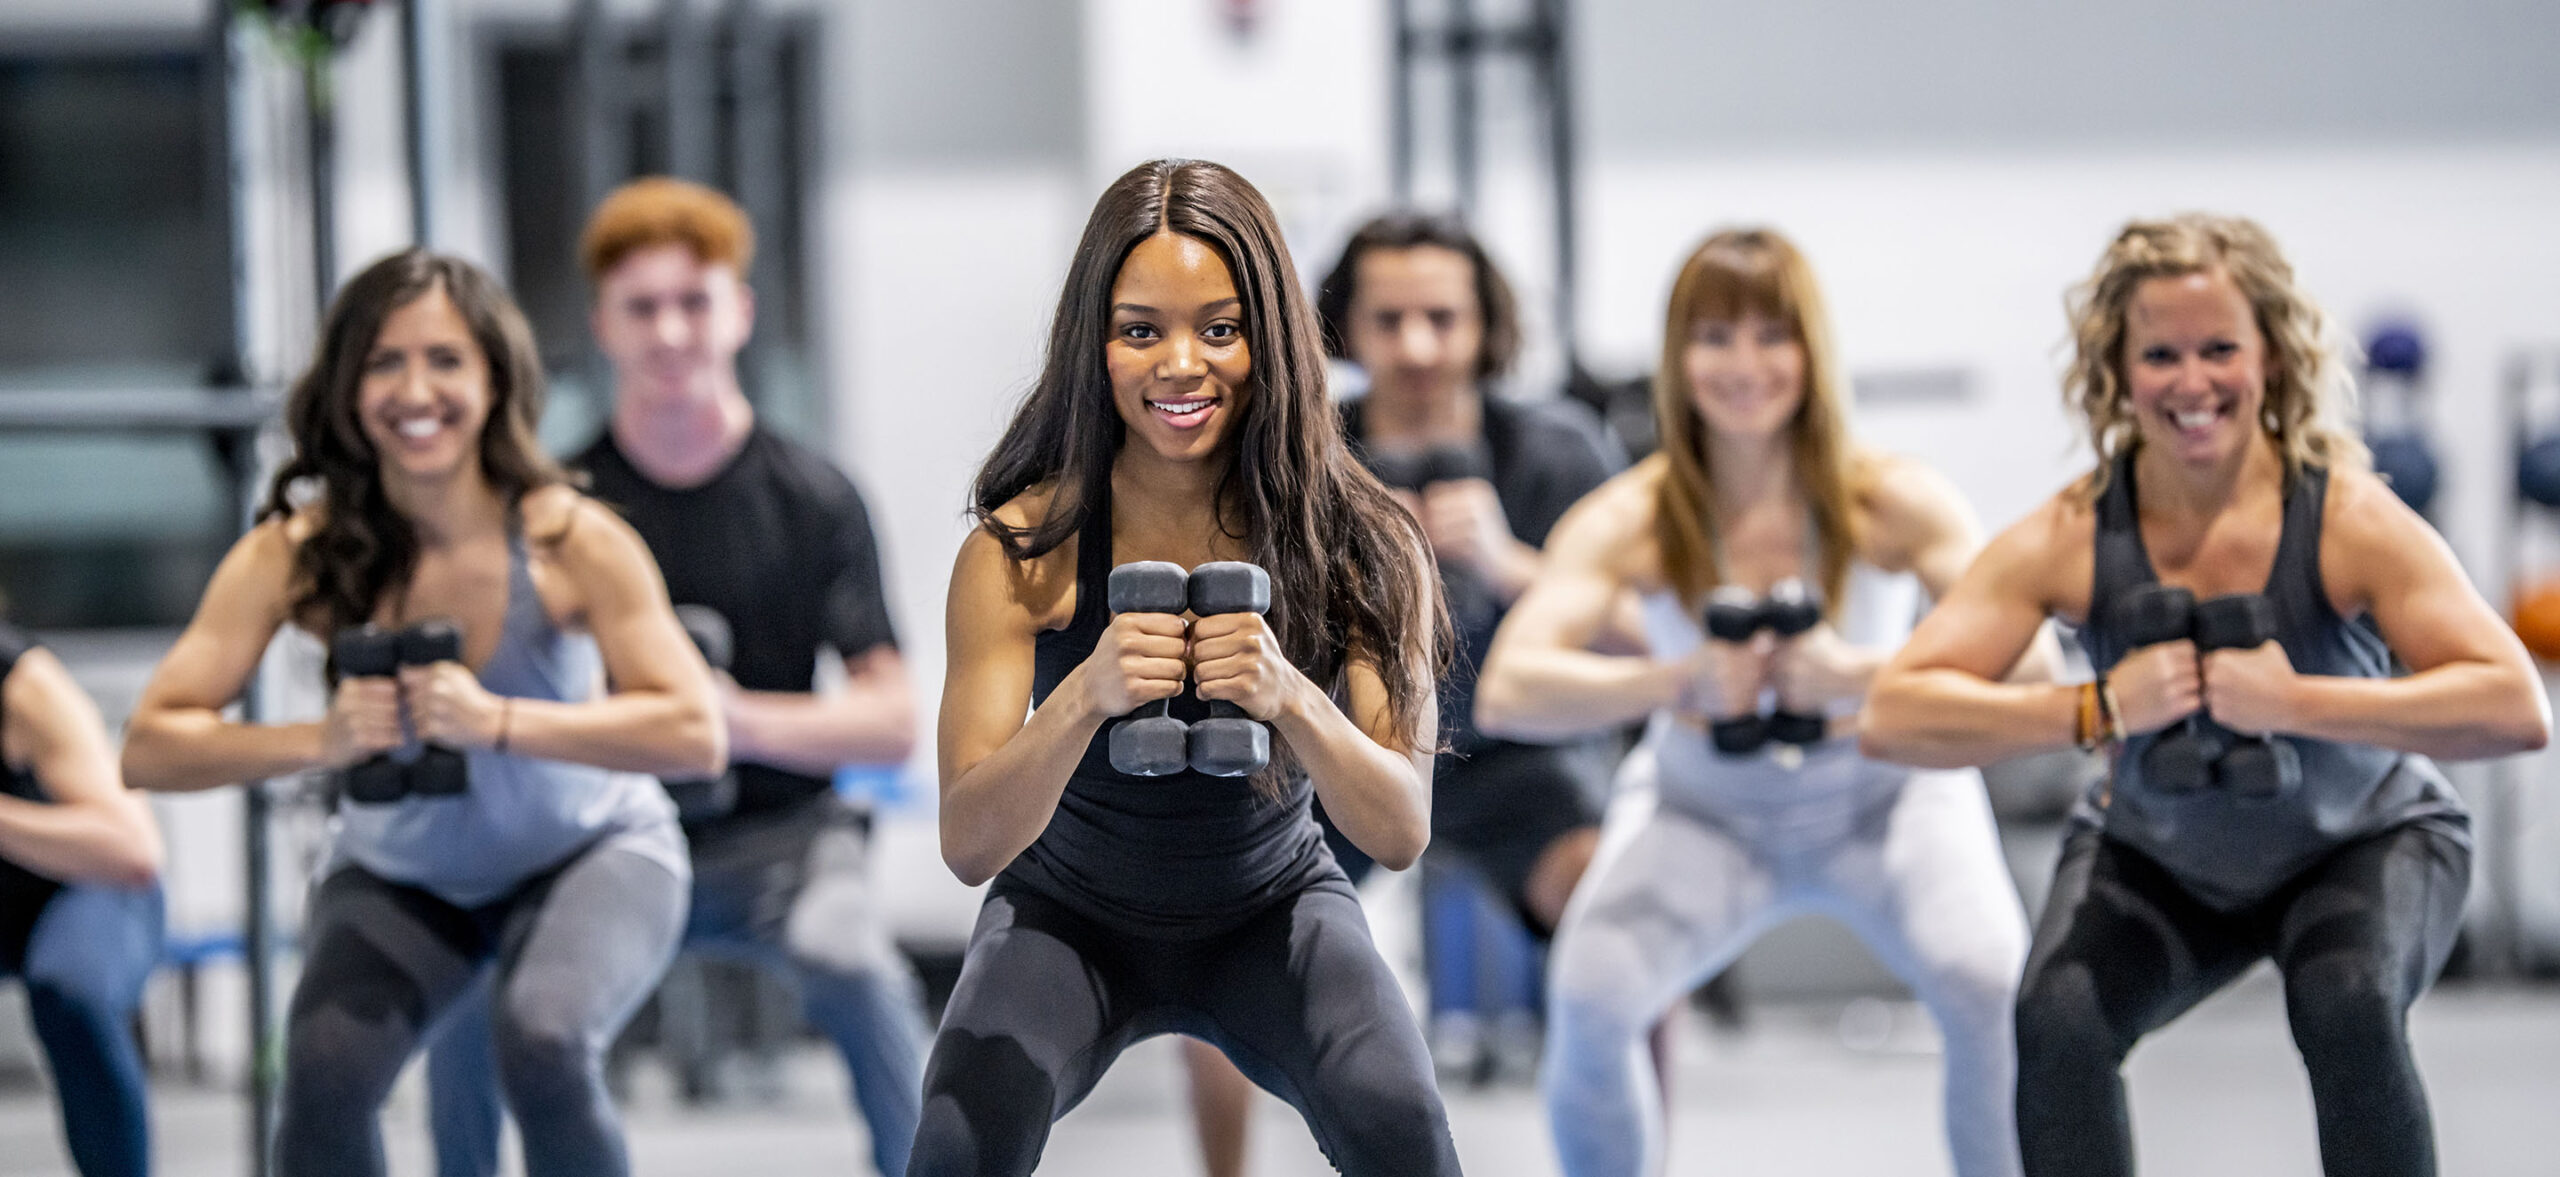 A multi-ethnic group of men and women are indoors in a gym. They are smiling while squatting and lifting dumbbells.